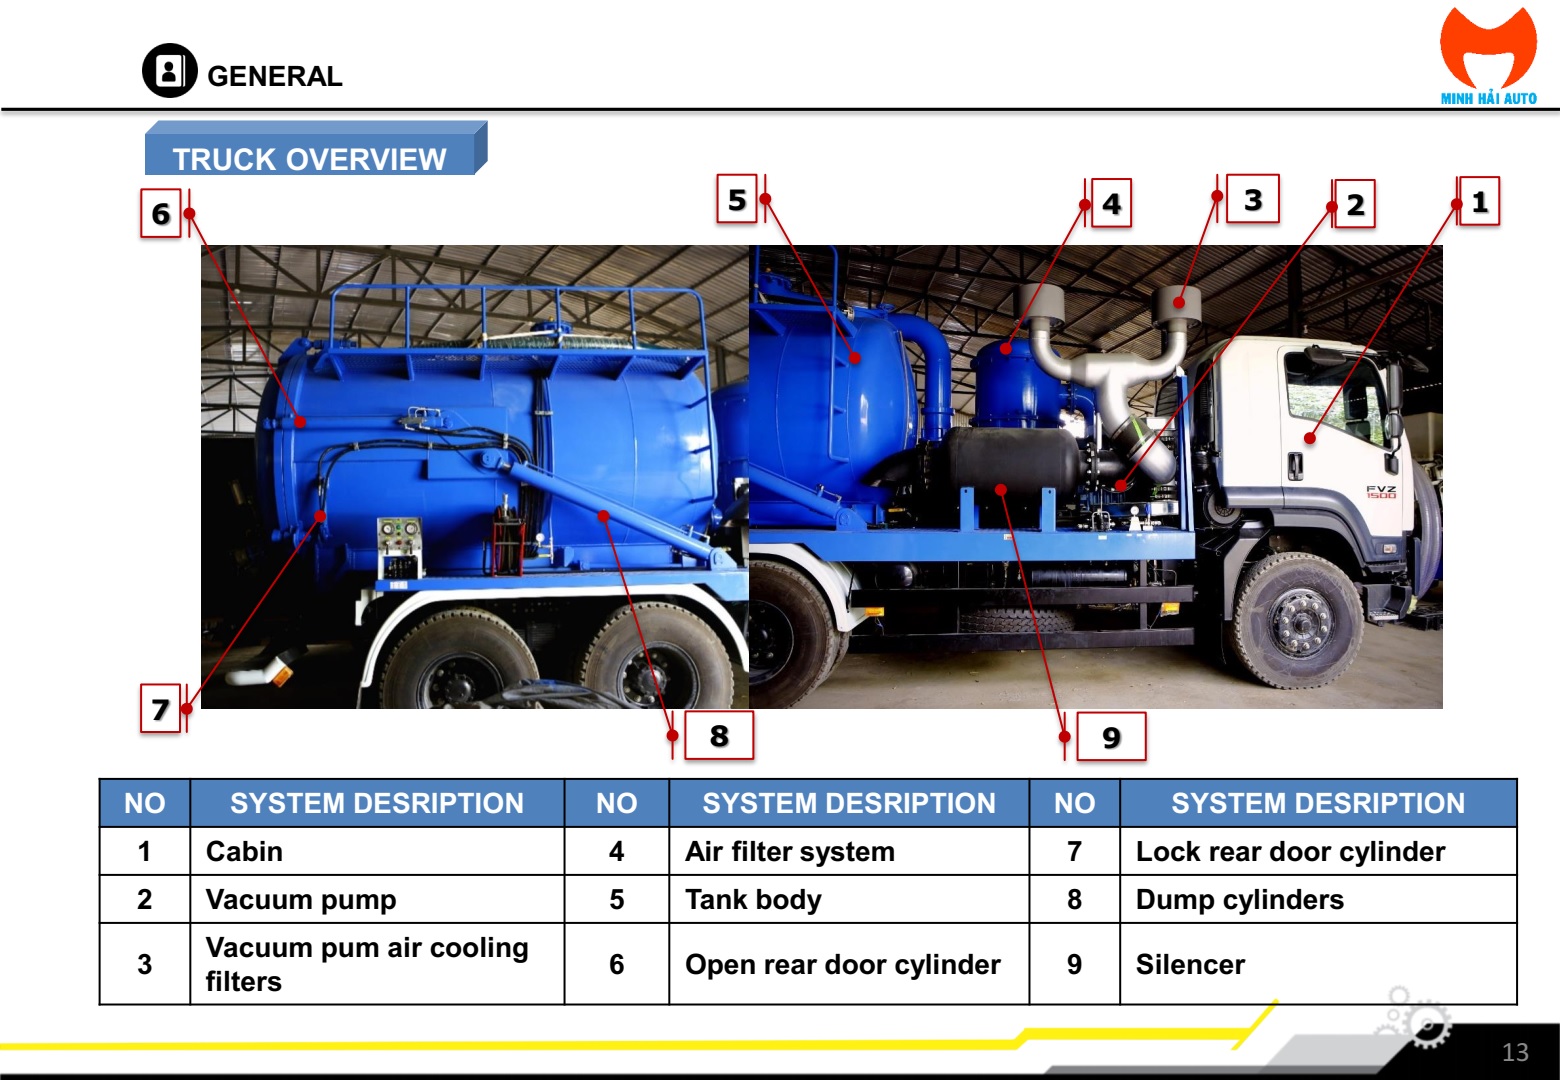 The overview of vacuum truck